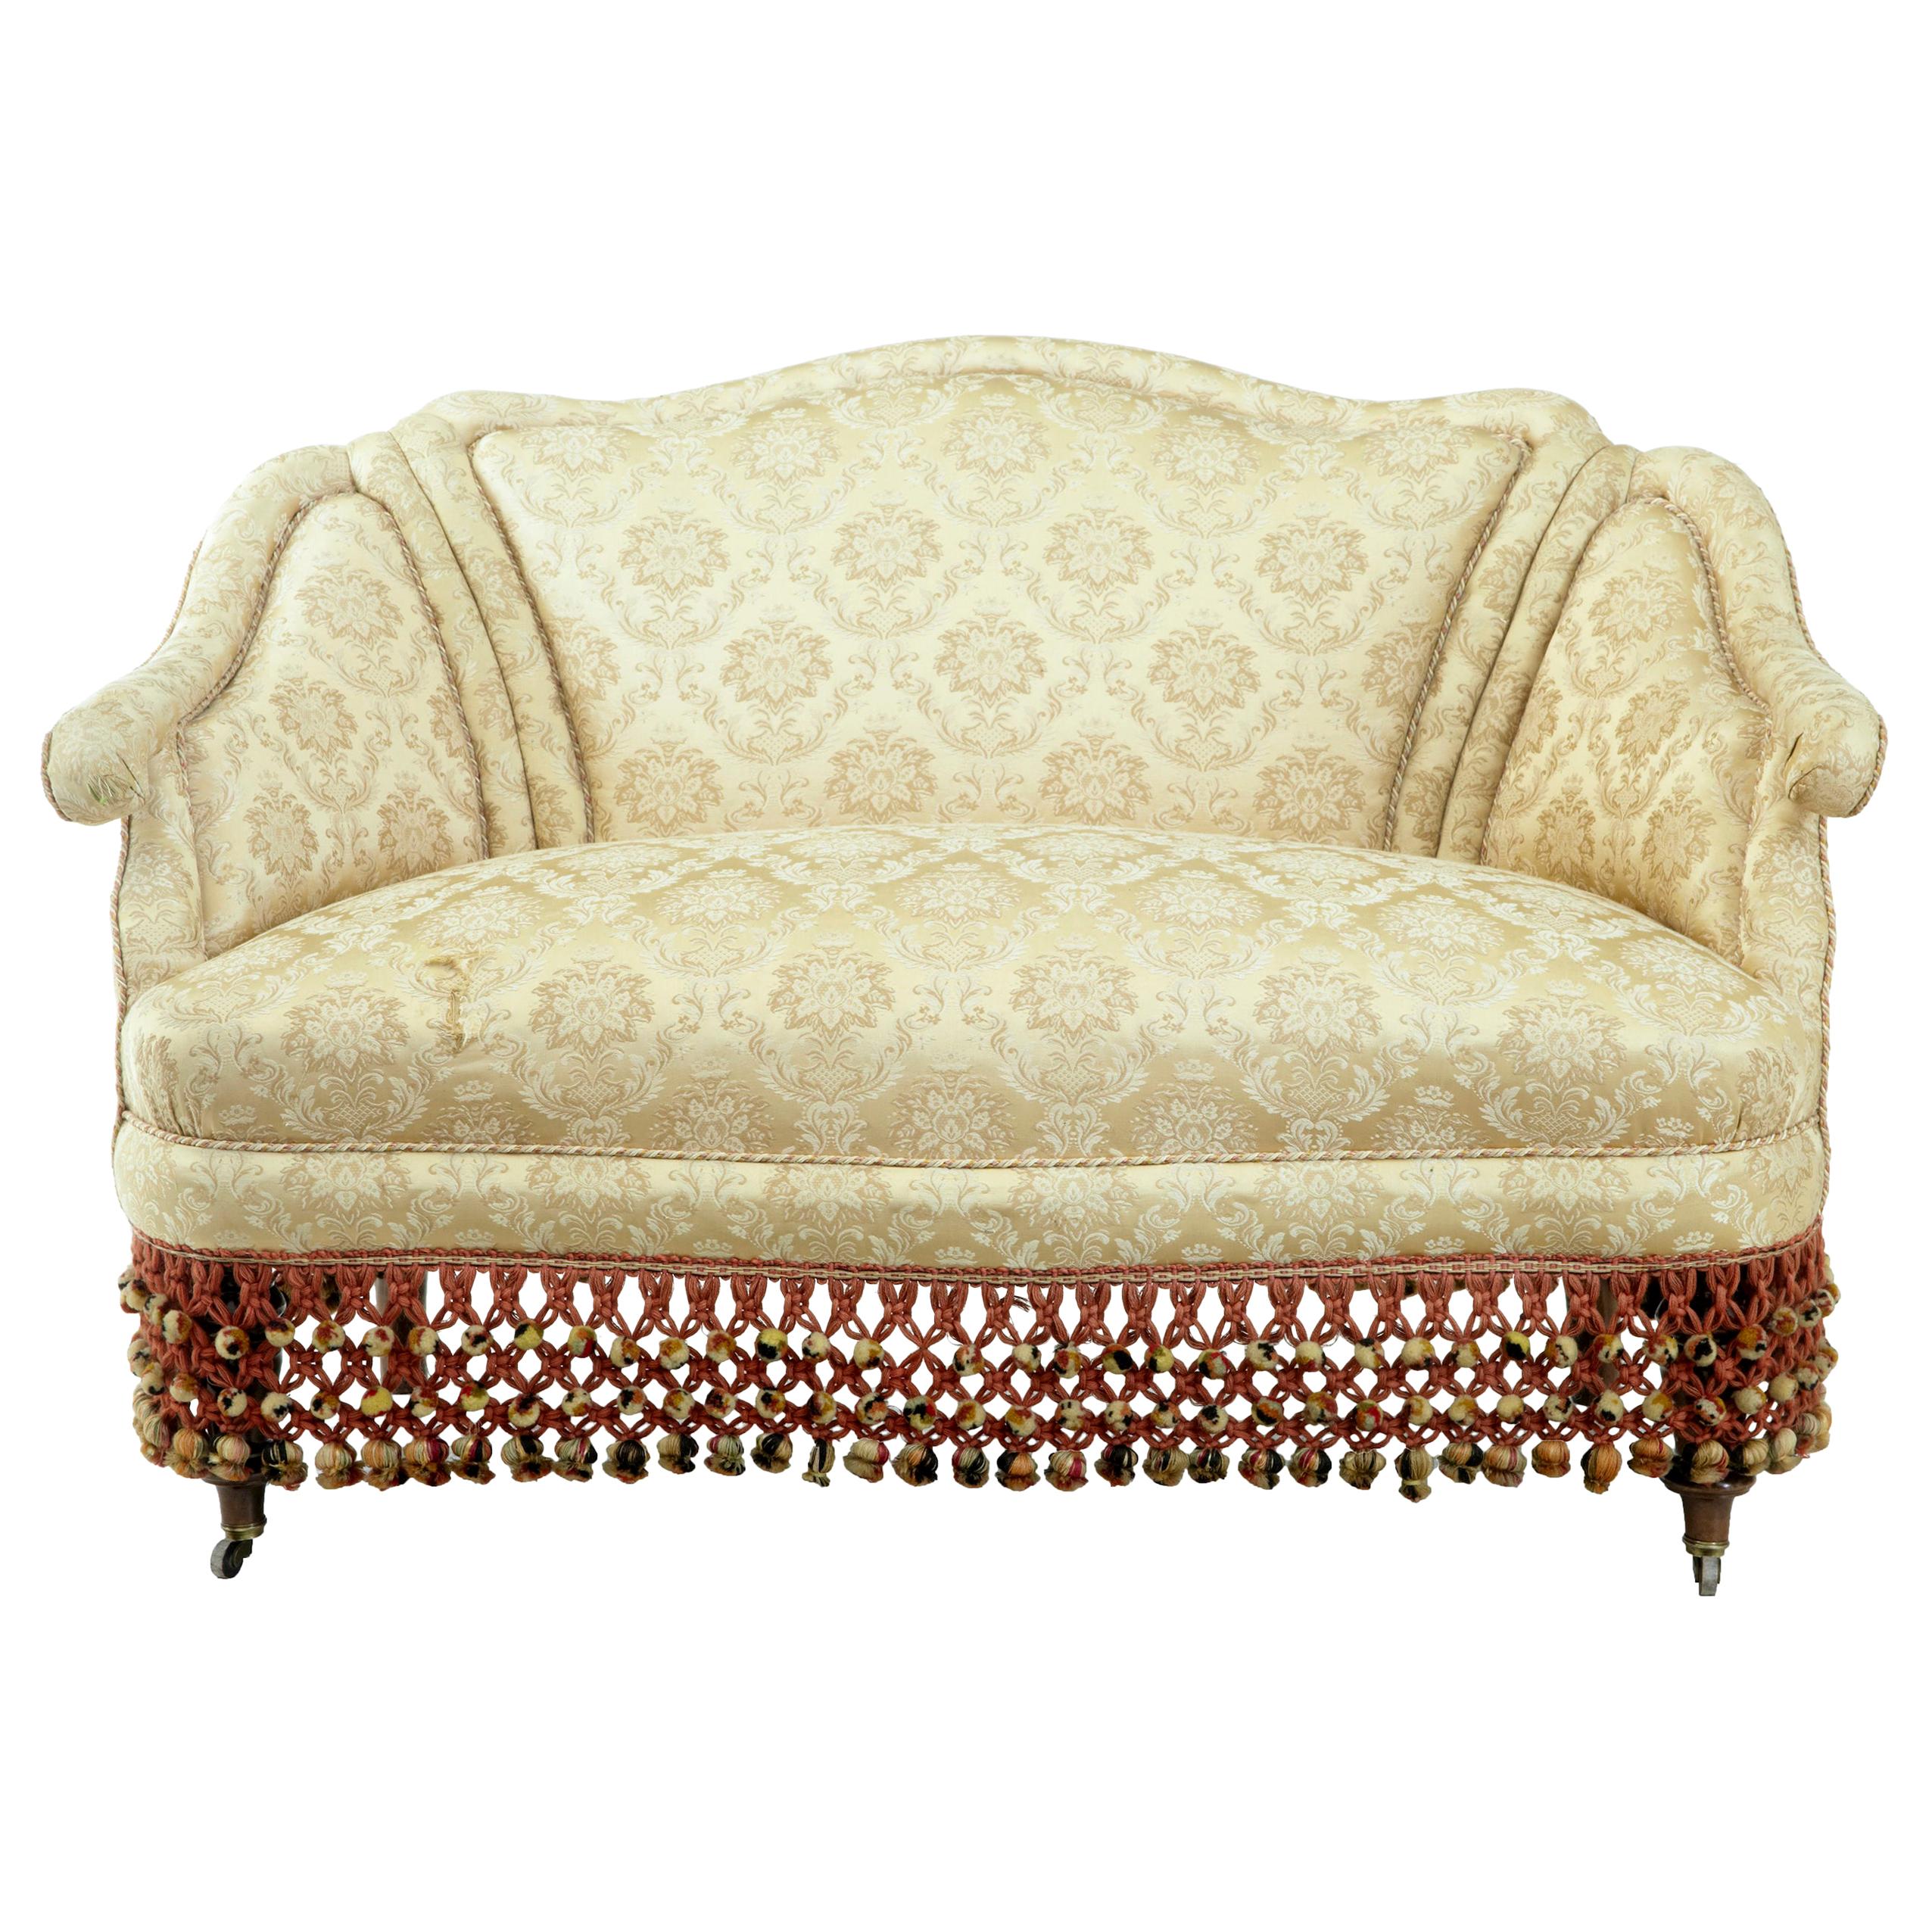 Early 20th Century French Boudoire Small Bedroom Sofa